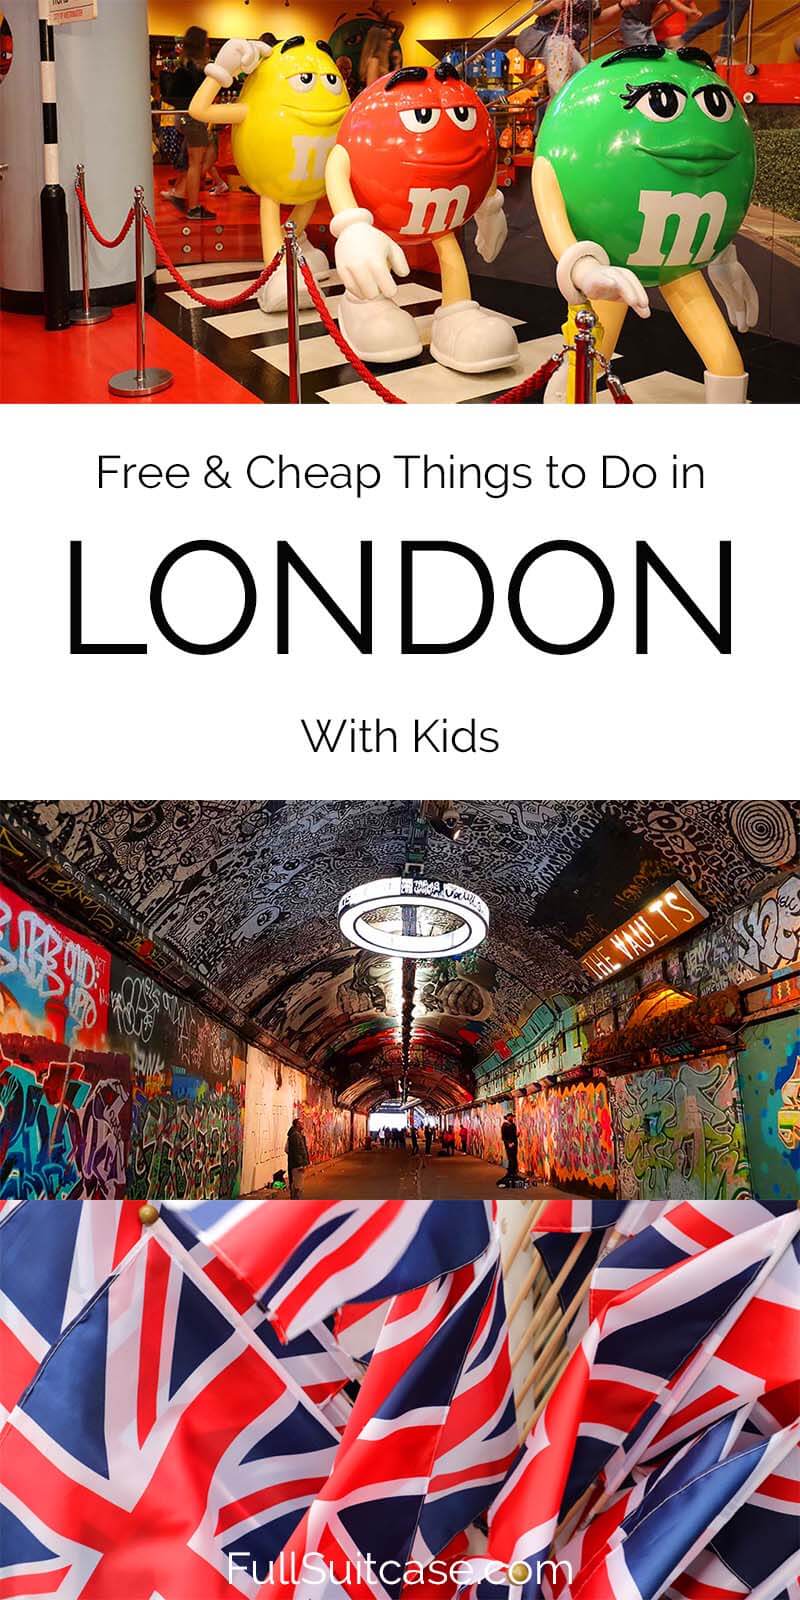 London free sights and cheap family-friendly attractions for families with kids